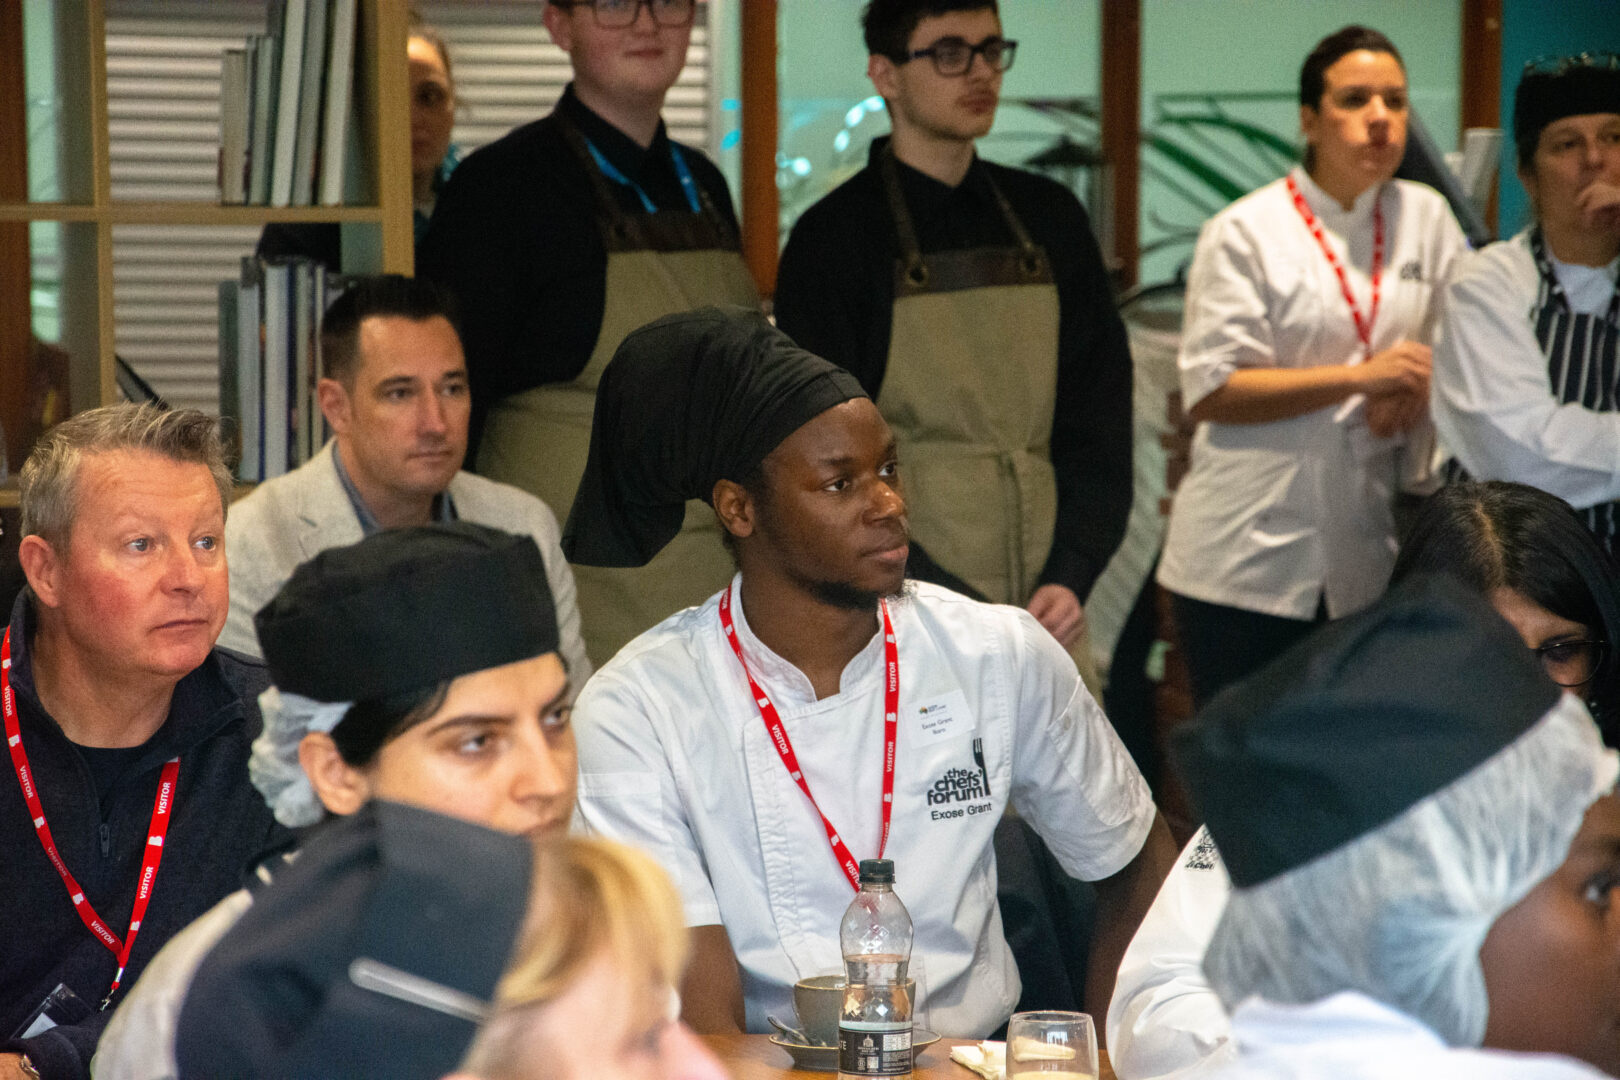 guest chef, xhose grant, sits among our students as they listen to a talk